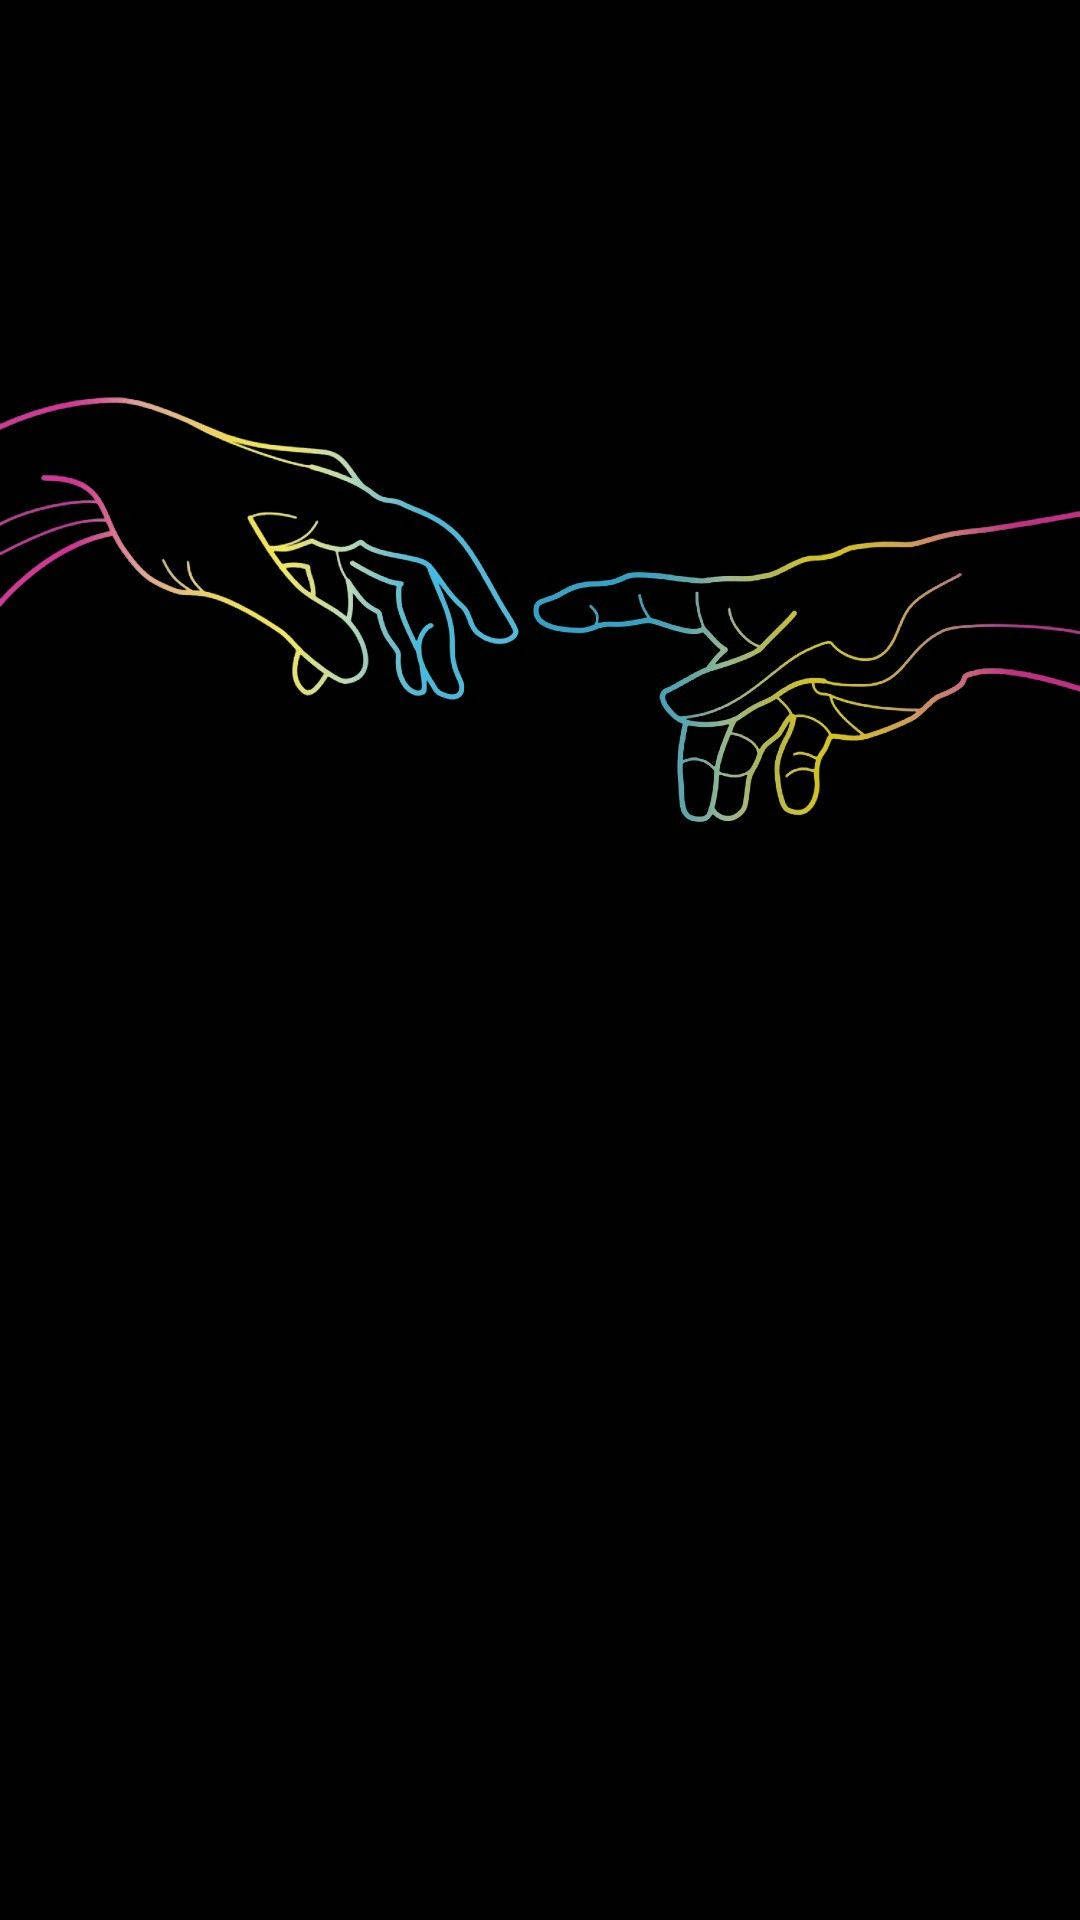 A hand reaching out to another one on black background - Gay, non binary